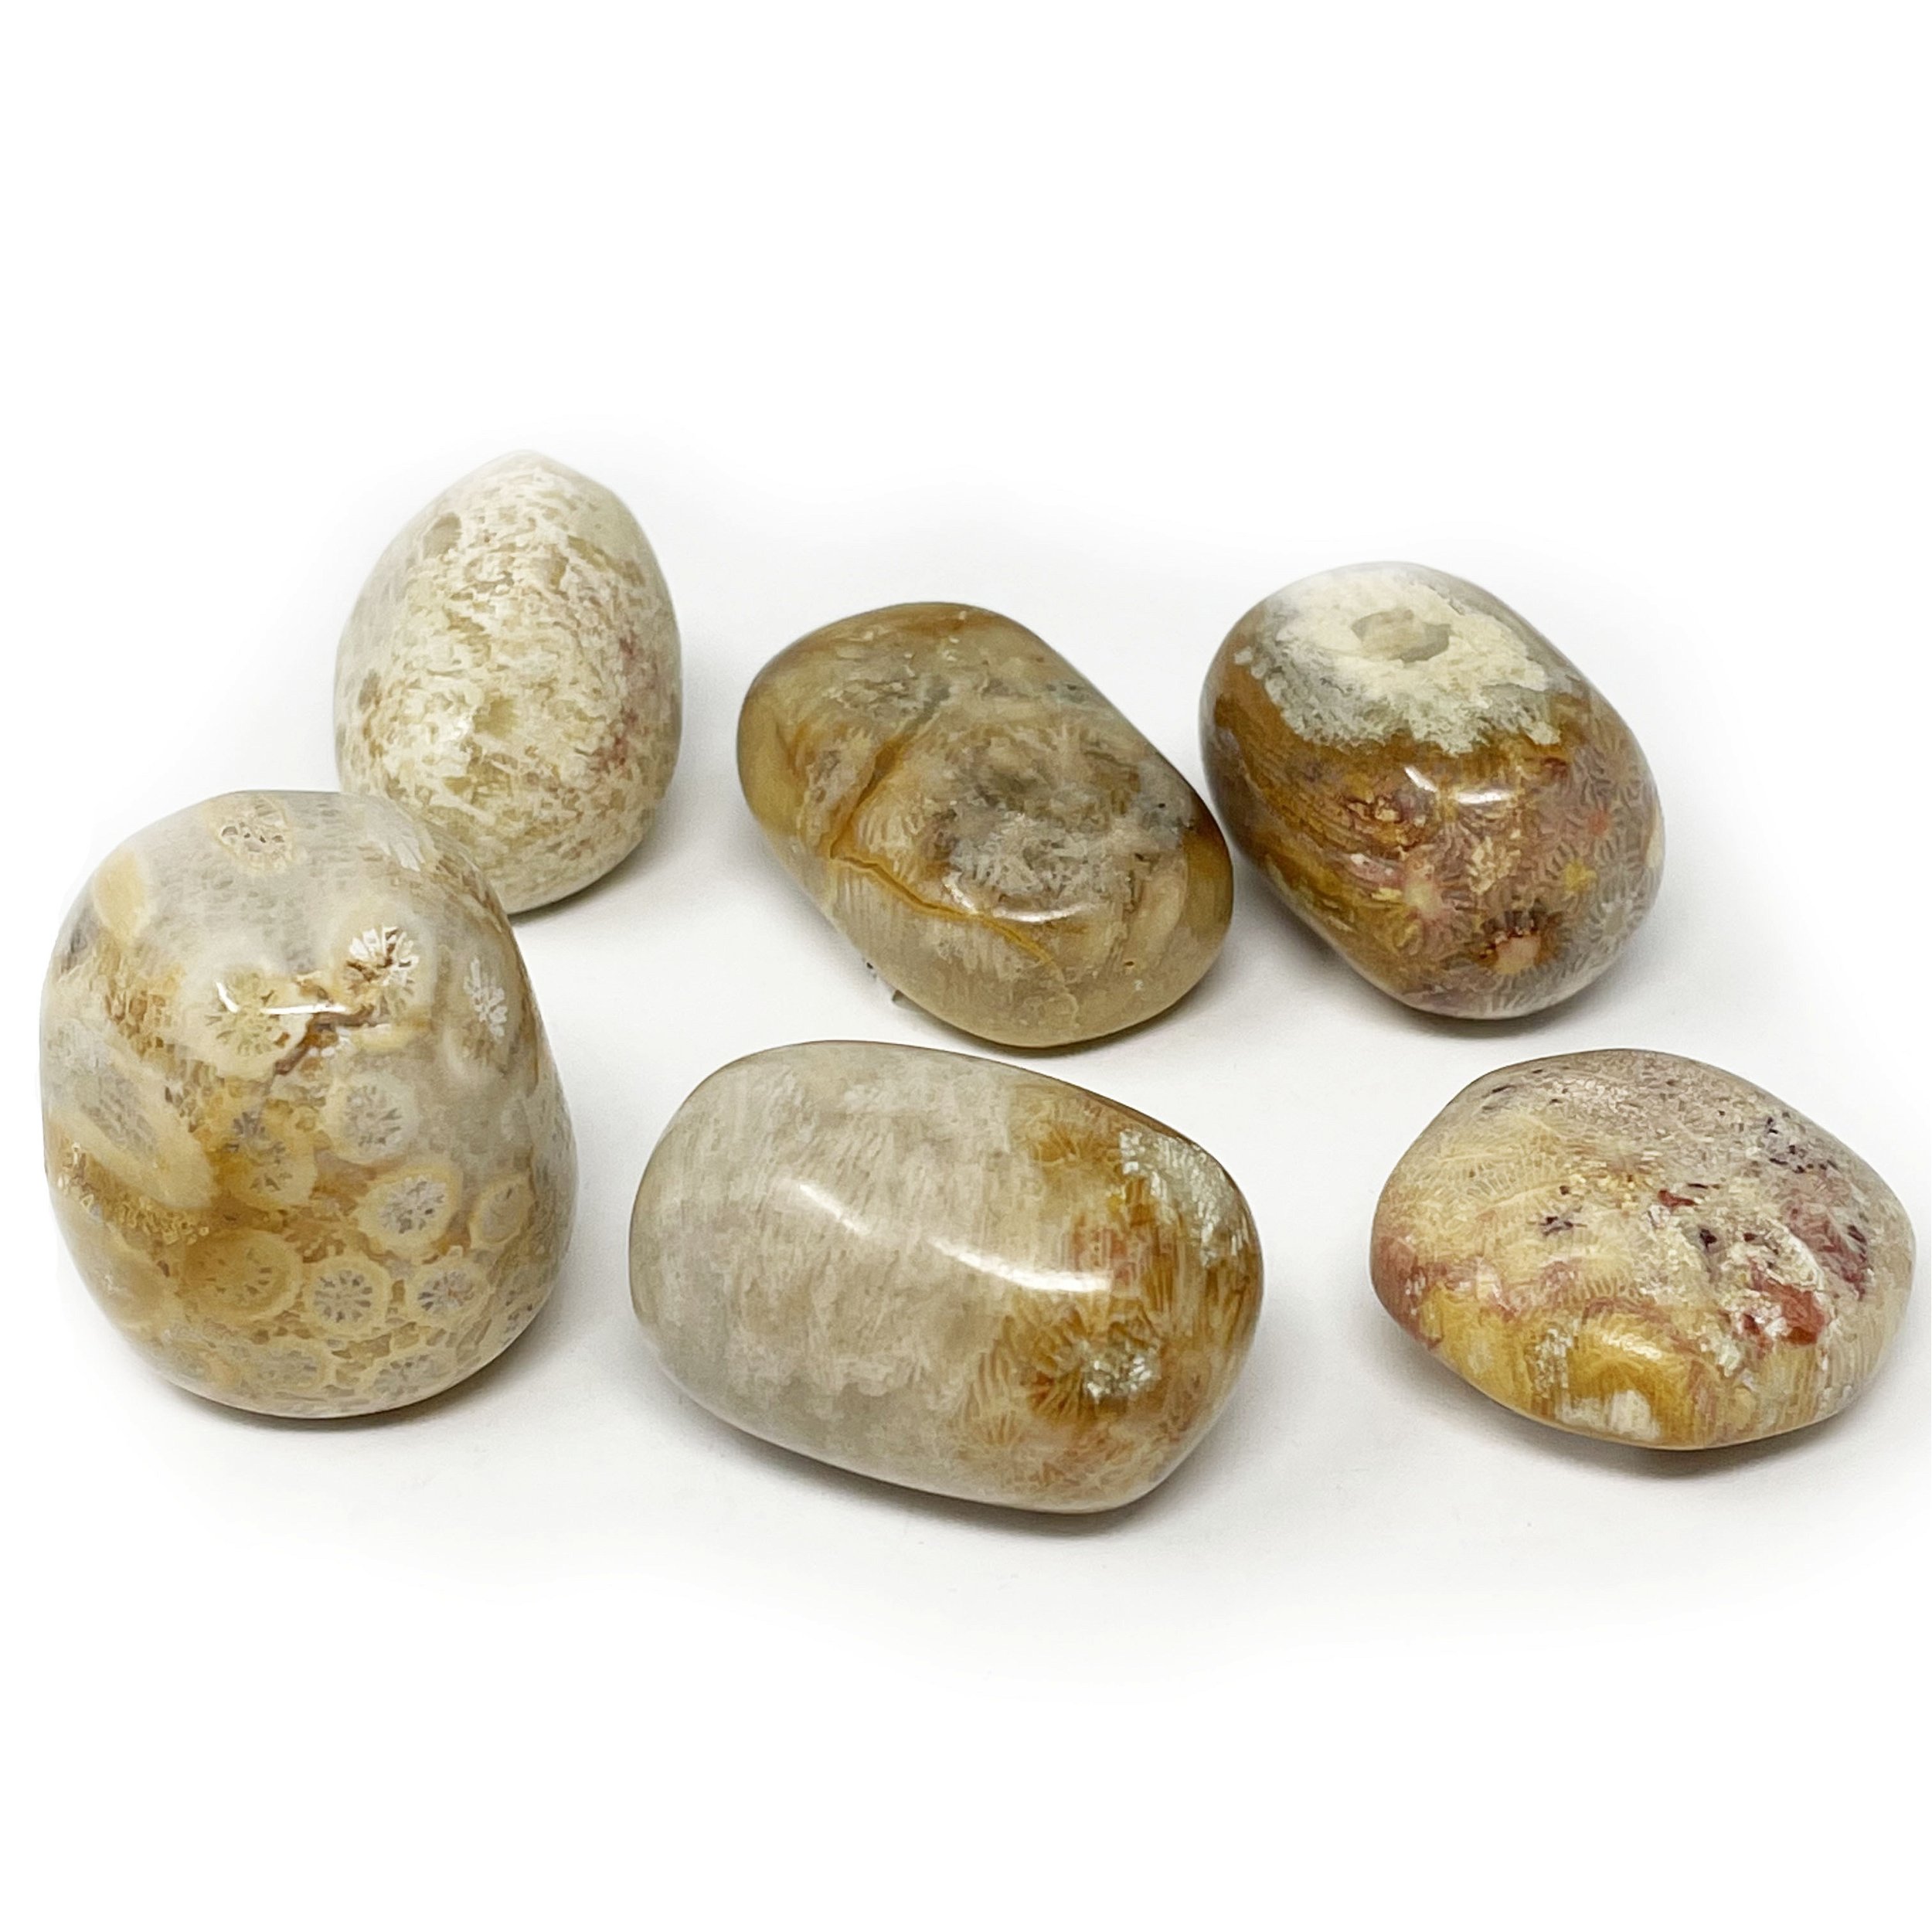 Tumbled Fossilized Coral From Indonesia (Singles)